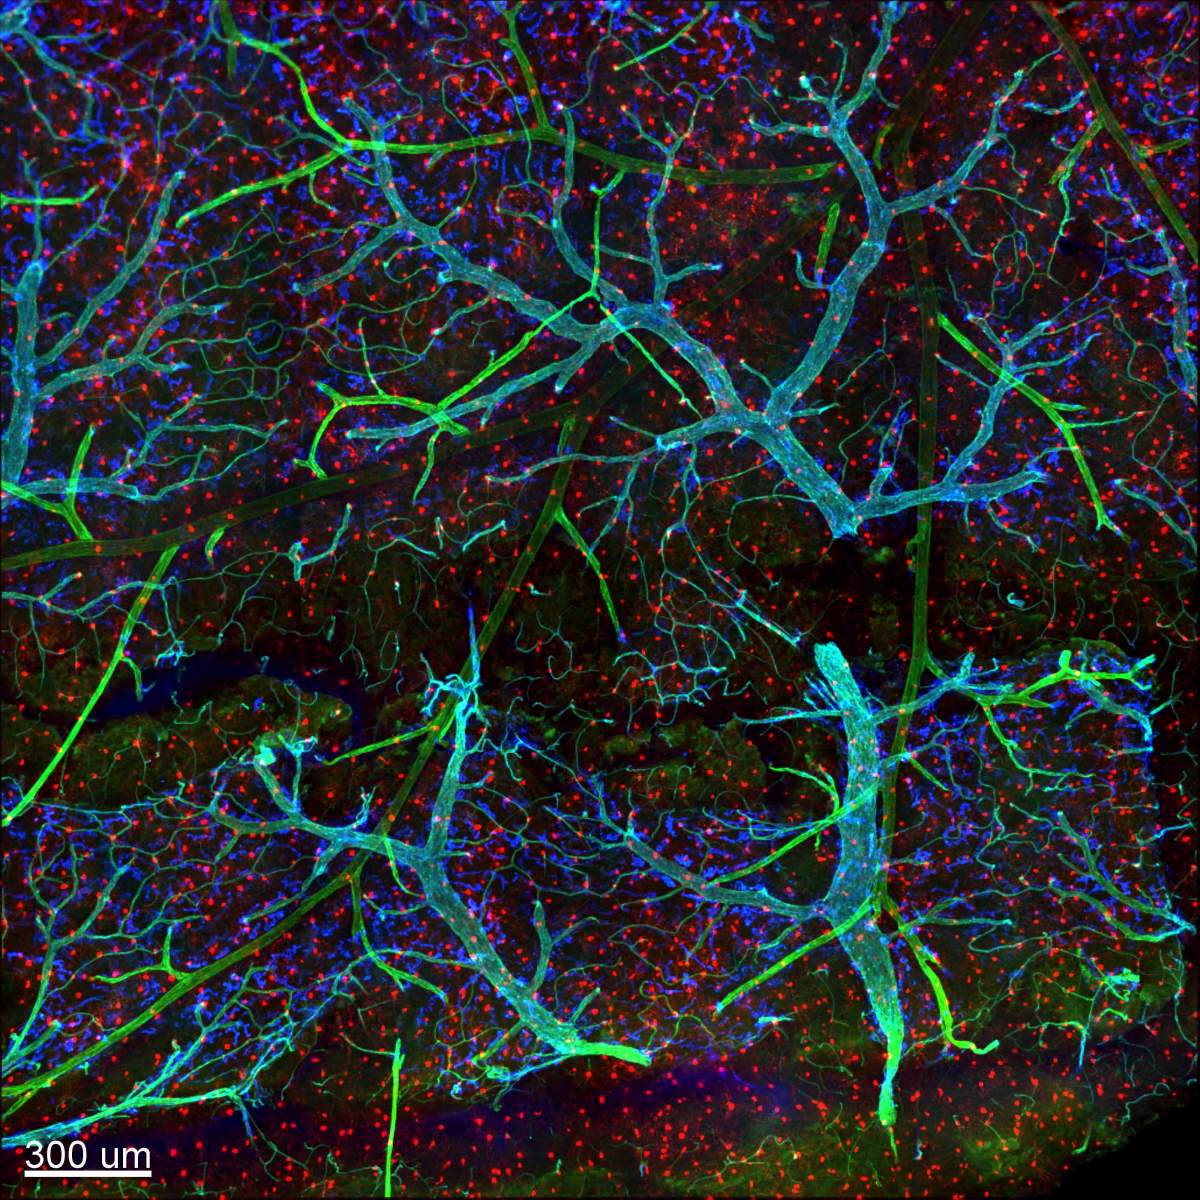 Meninges and underlying tissue in a mouse brain: Microglia (red) have a characteristic hairy structure. Blood vessels are in green